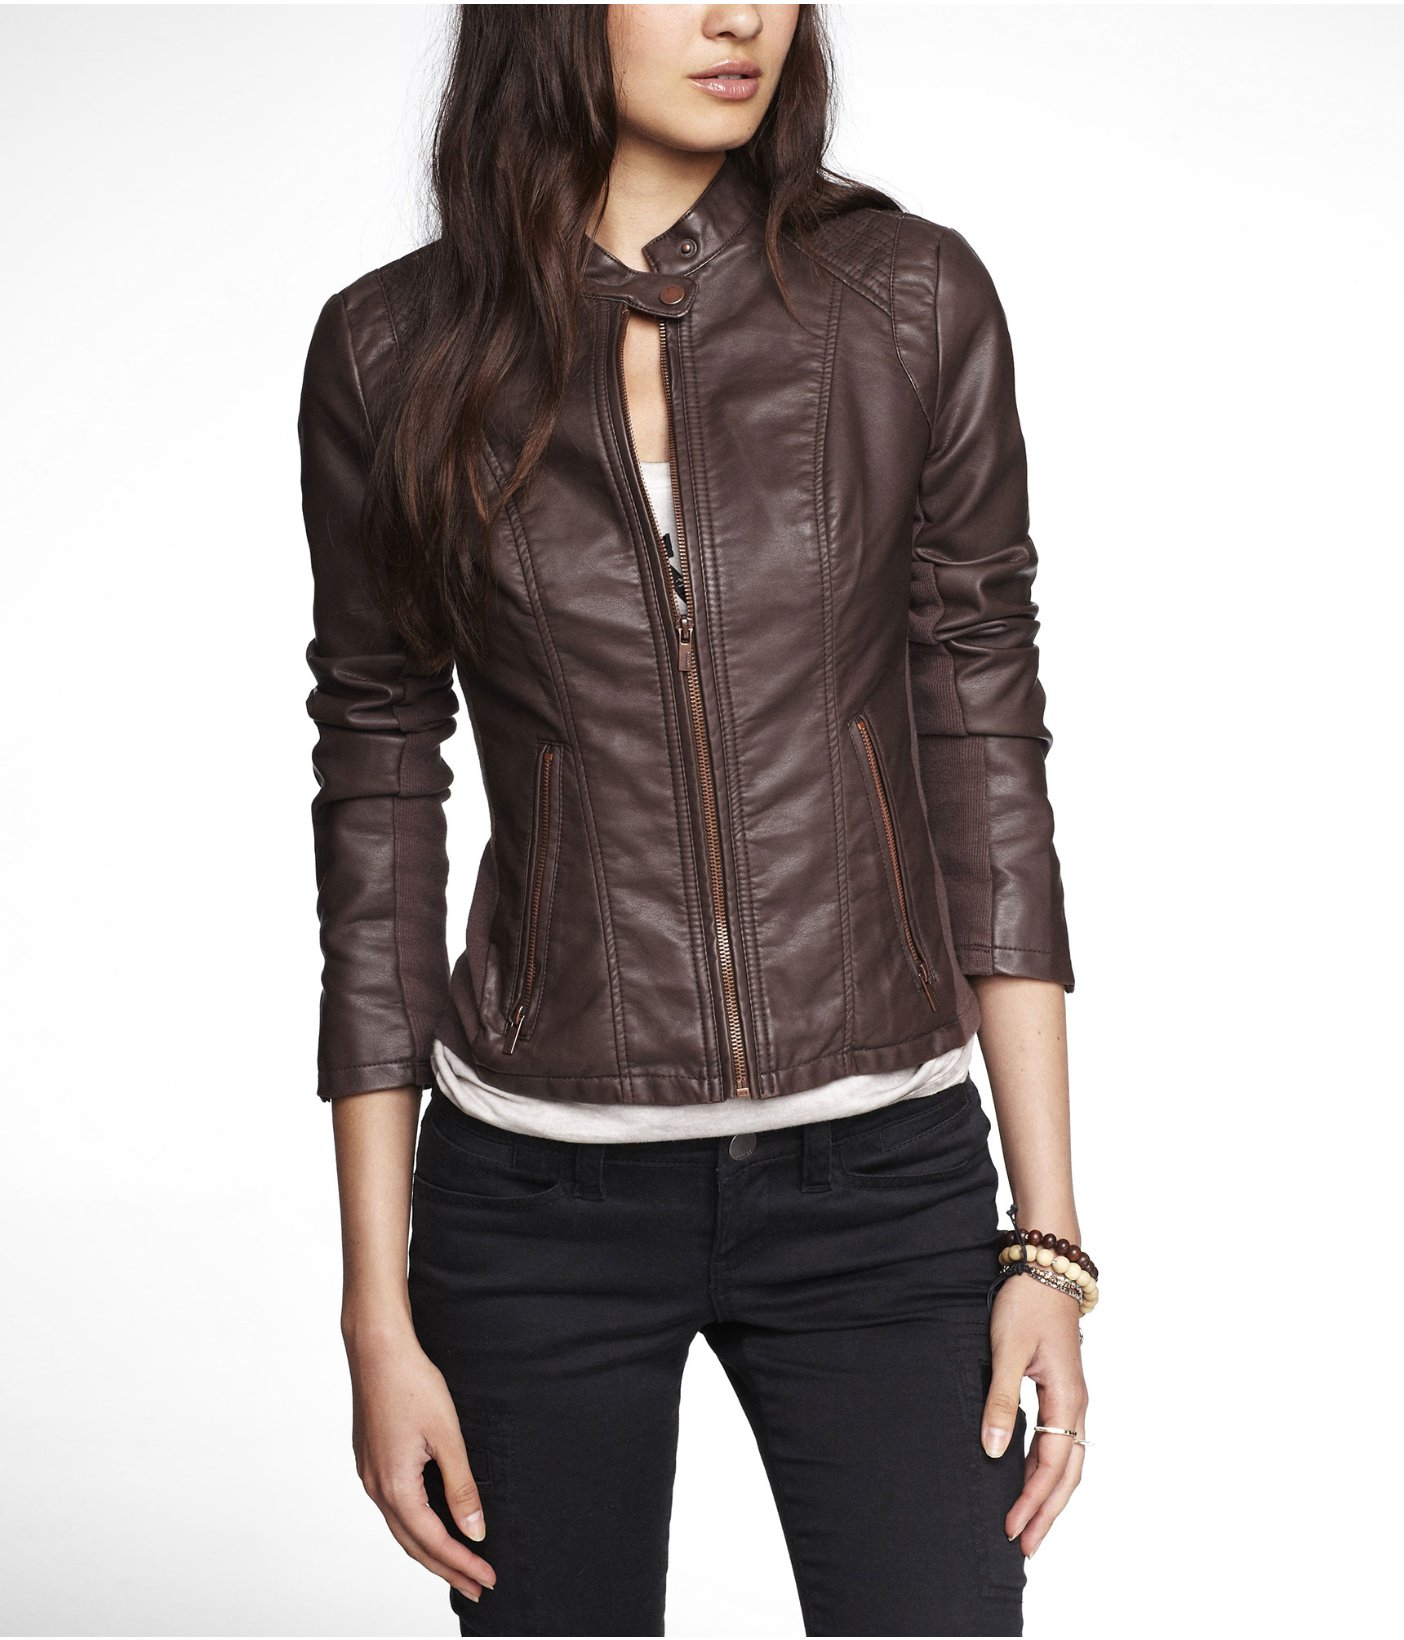 Lyst - Express Minus The Leather Double Peplum Moto Jacket in Brown